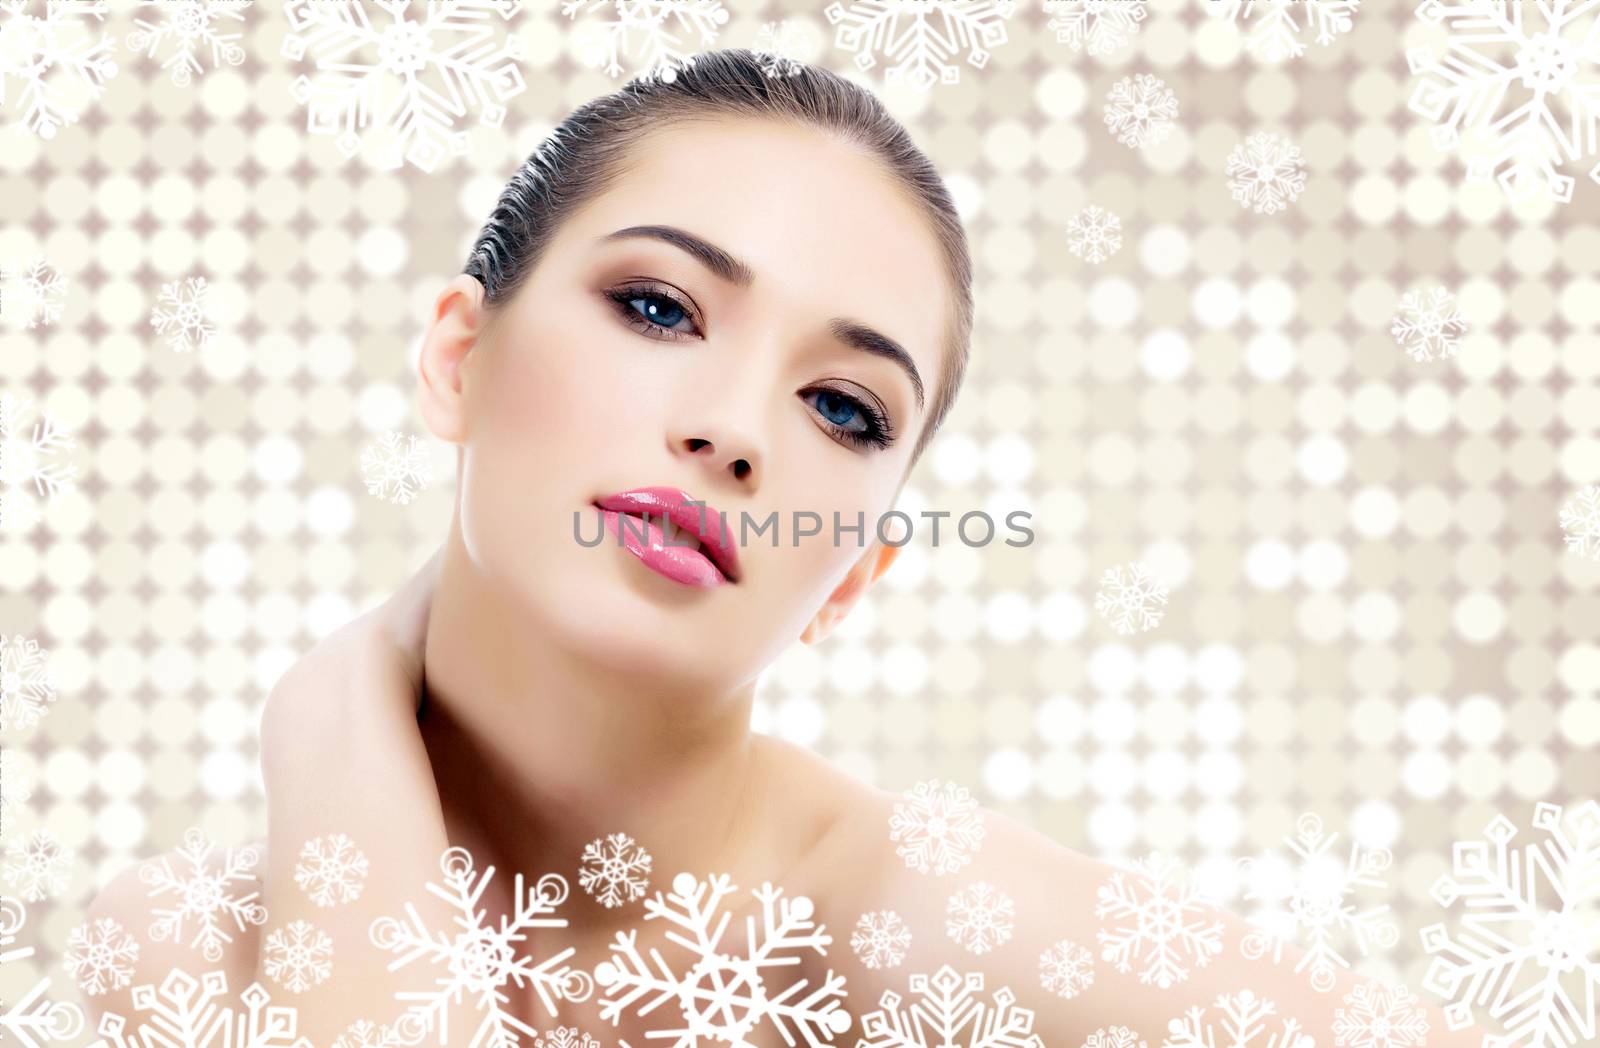 Pretty woman against an abstract background with circles and snowflakes. Winter skin treatment concept